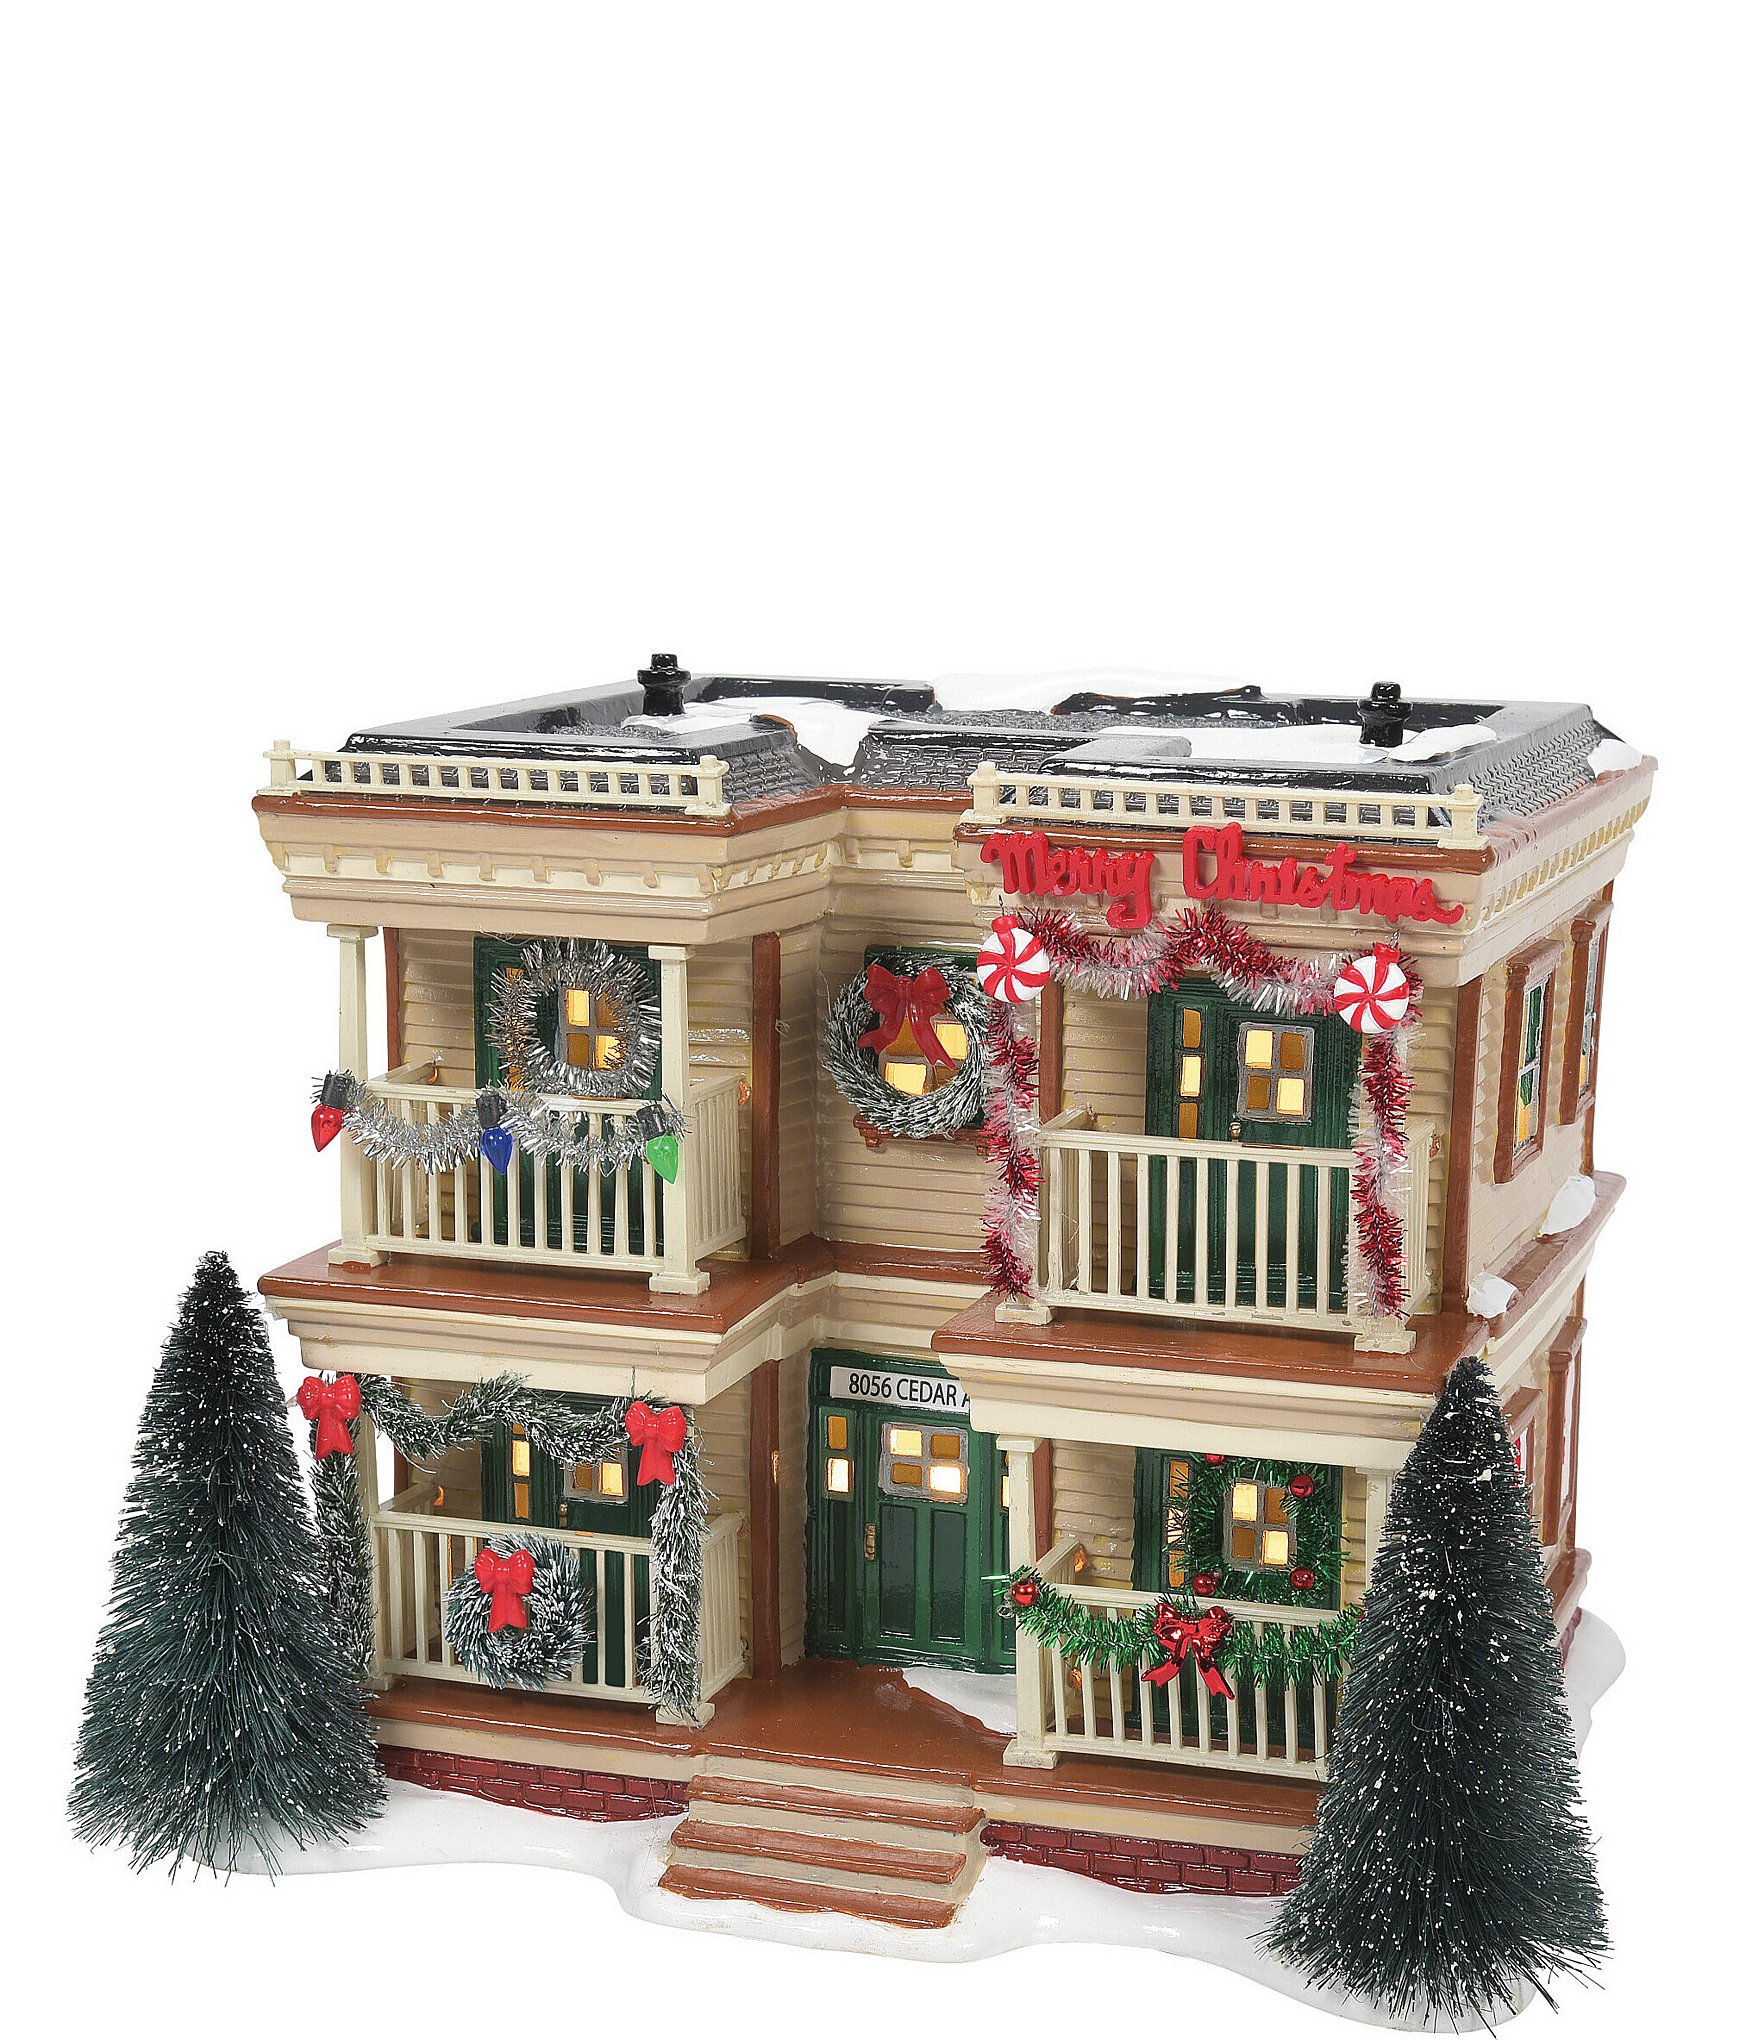 Department 56 - Christmas in The City - Uptown Chess Club